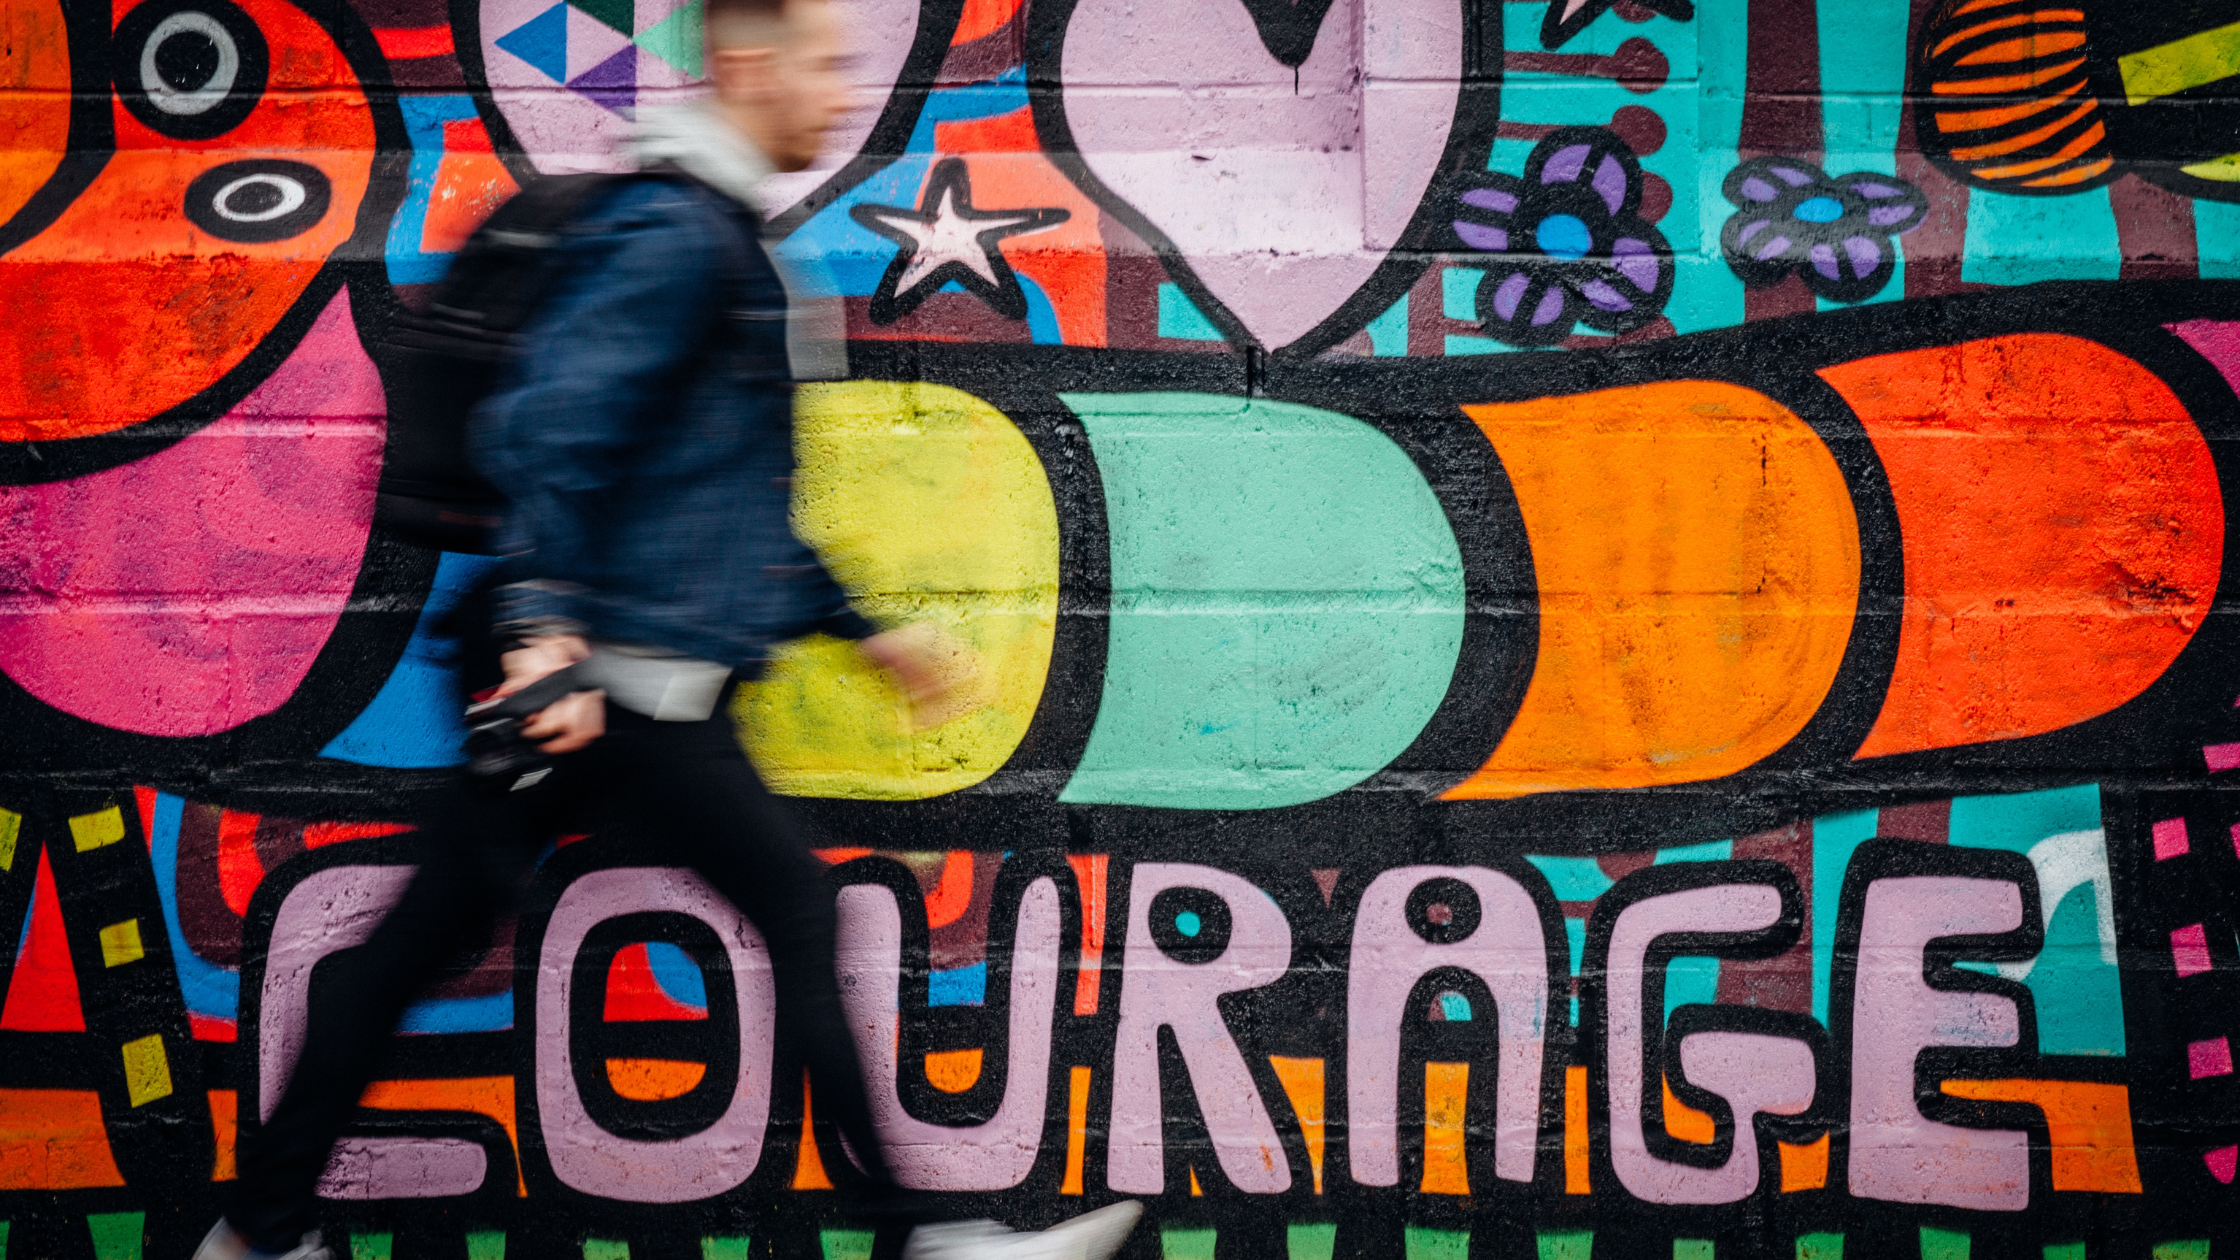 Man walking past a colourful mural that says "courage"